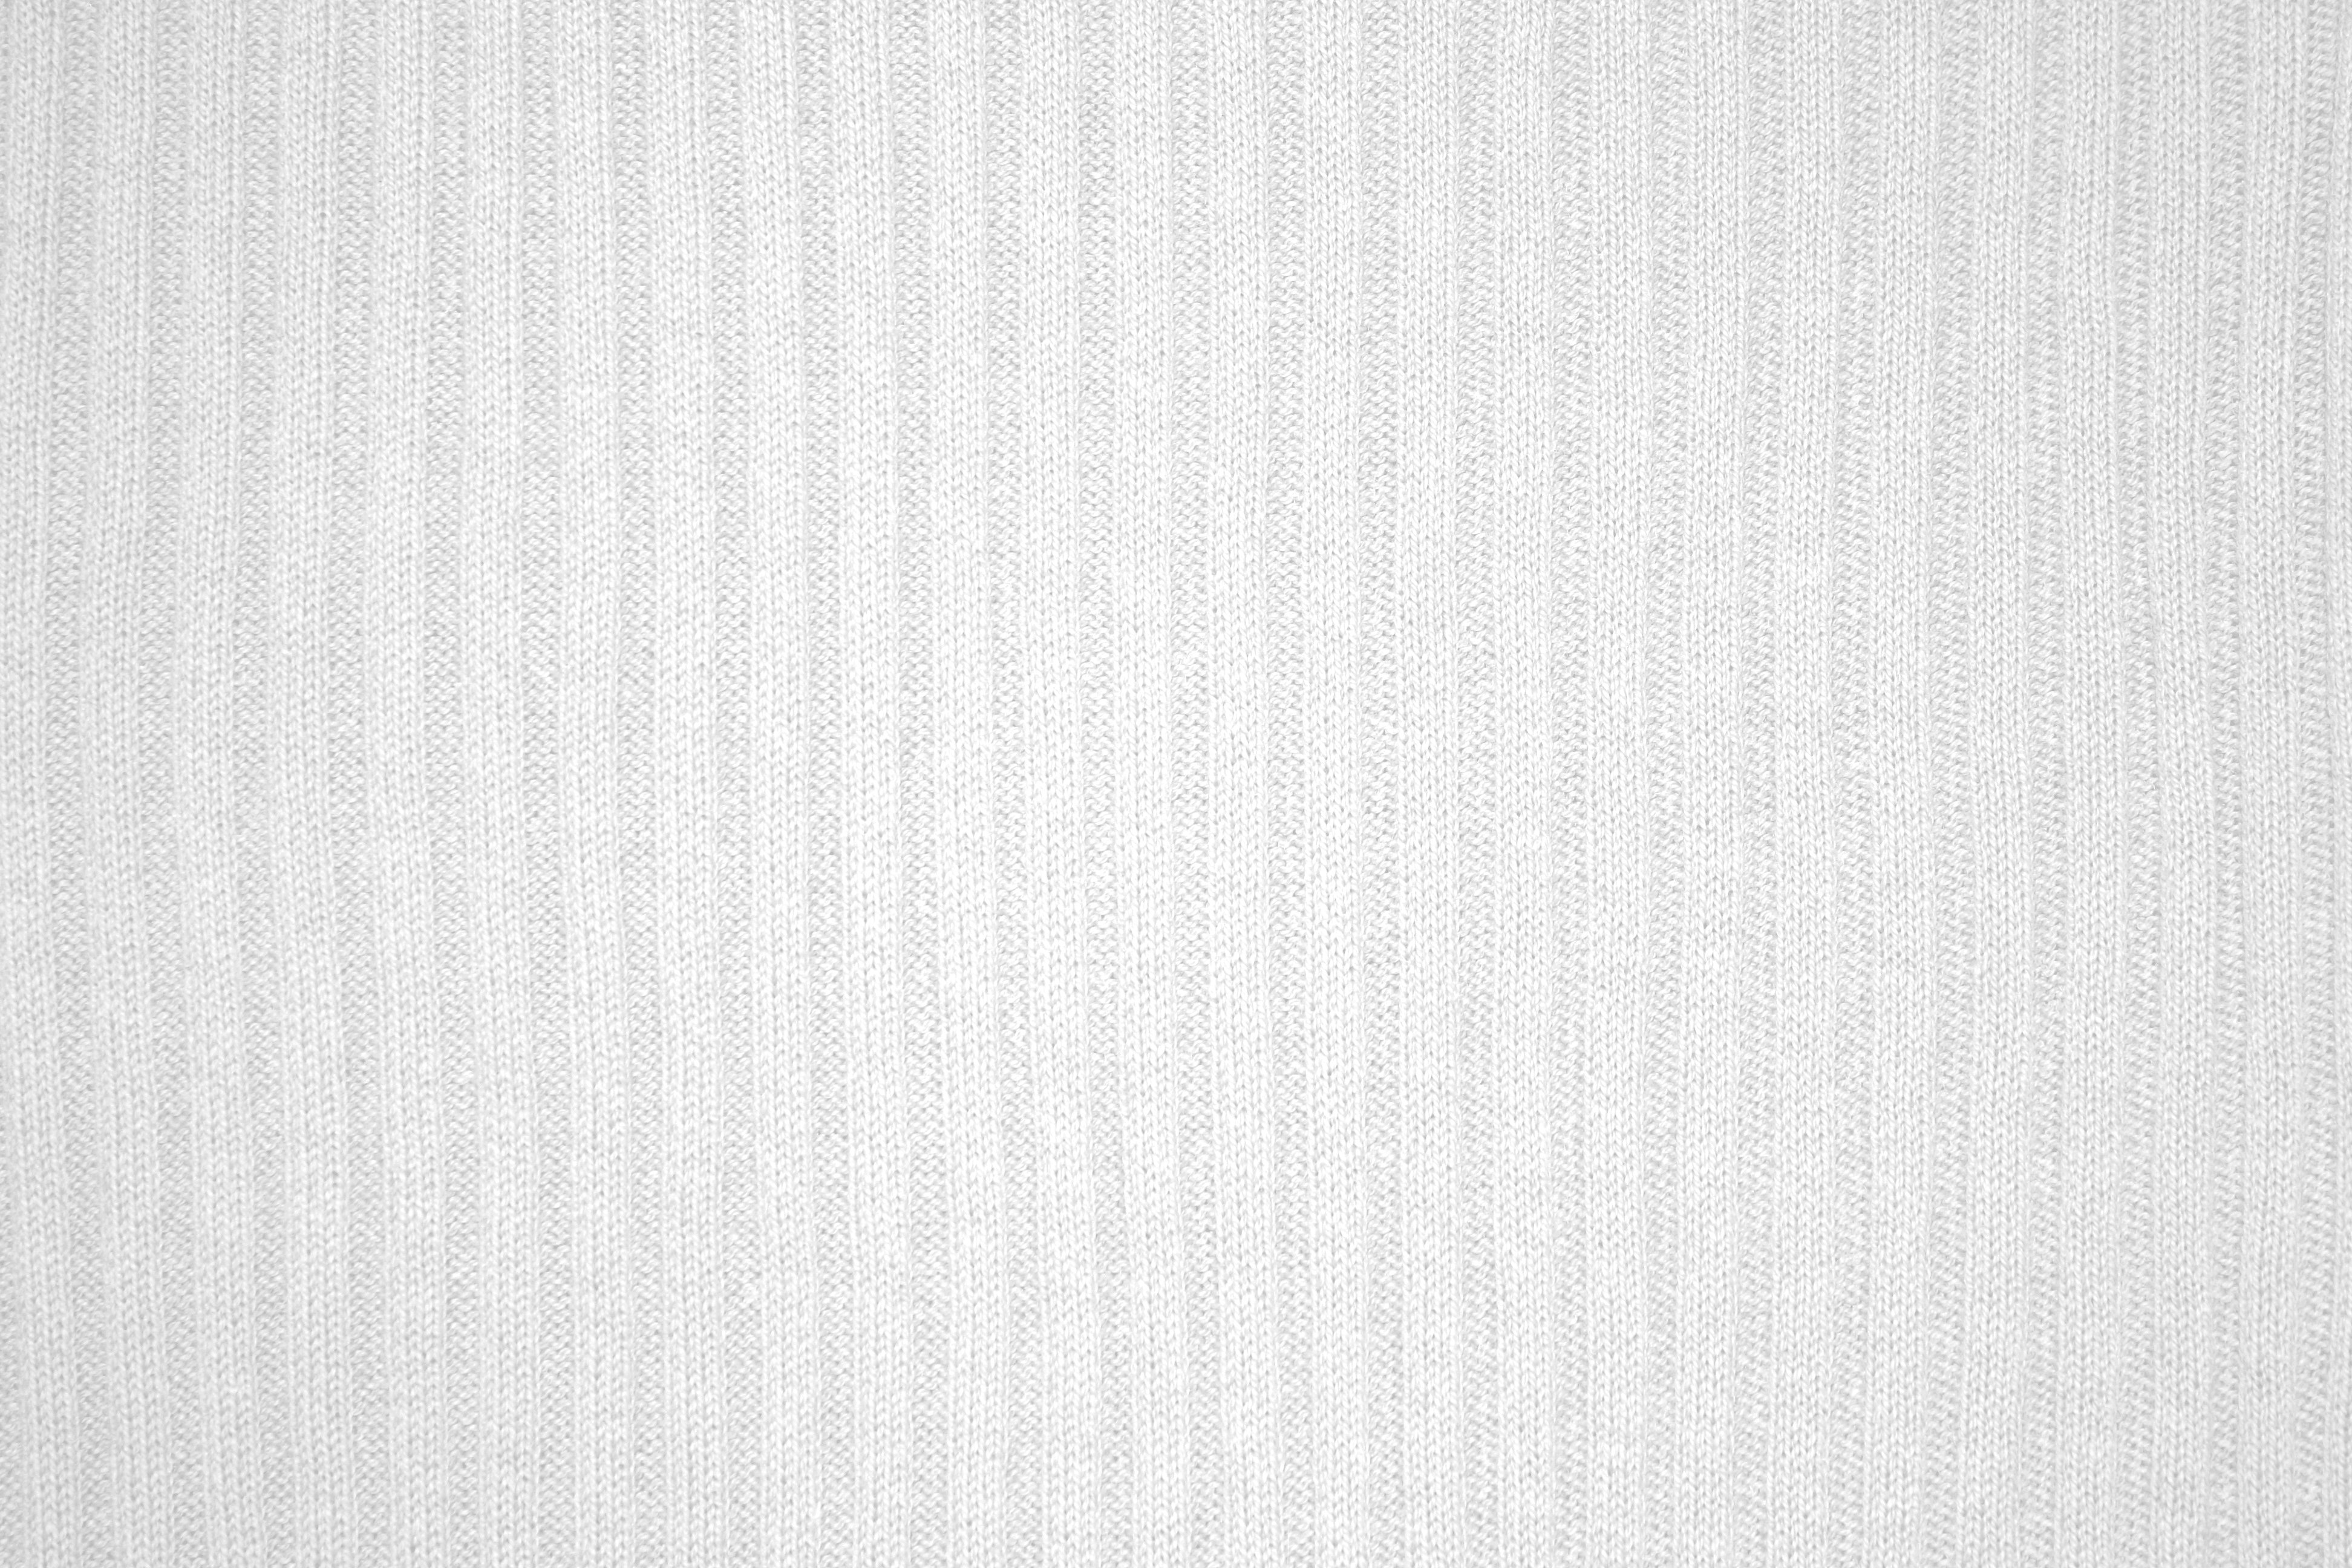 White Ribbed Knit Fabric Texture Picture, Free Photograph